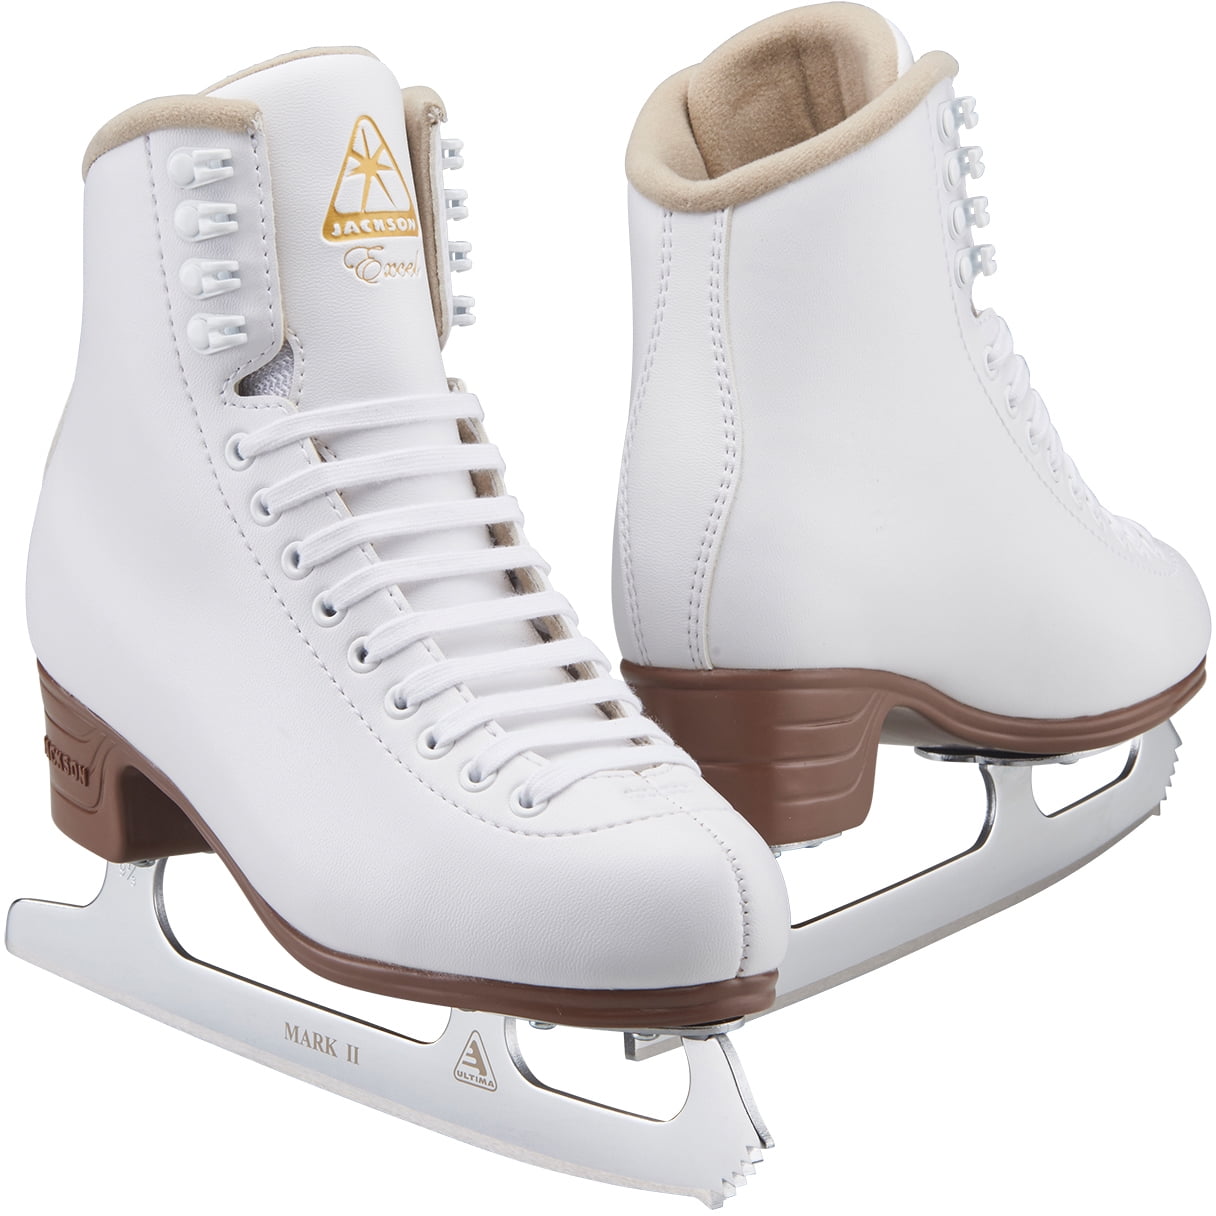 American Tricot Lined Figure Skates Size 5 White 522 for sale online 